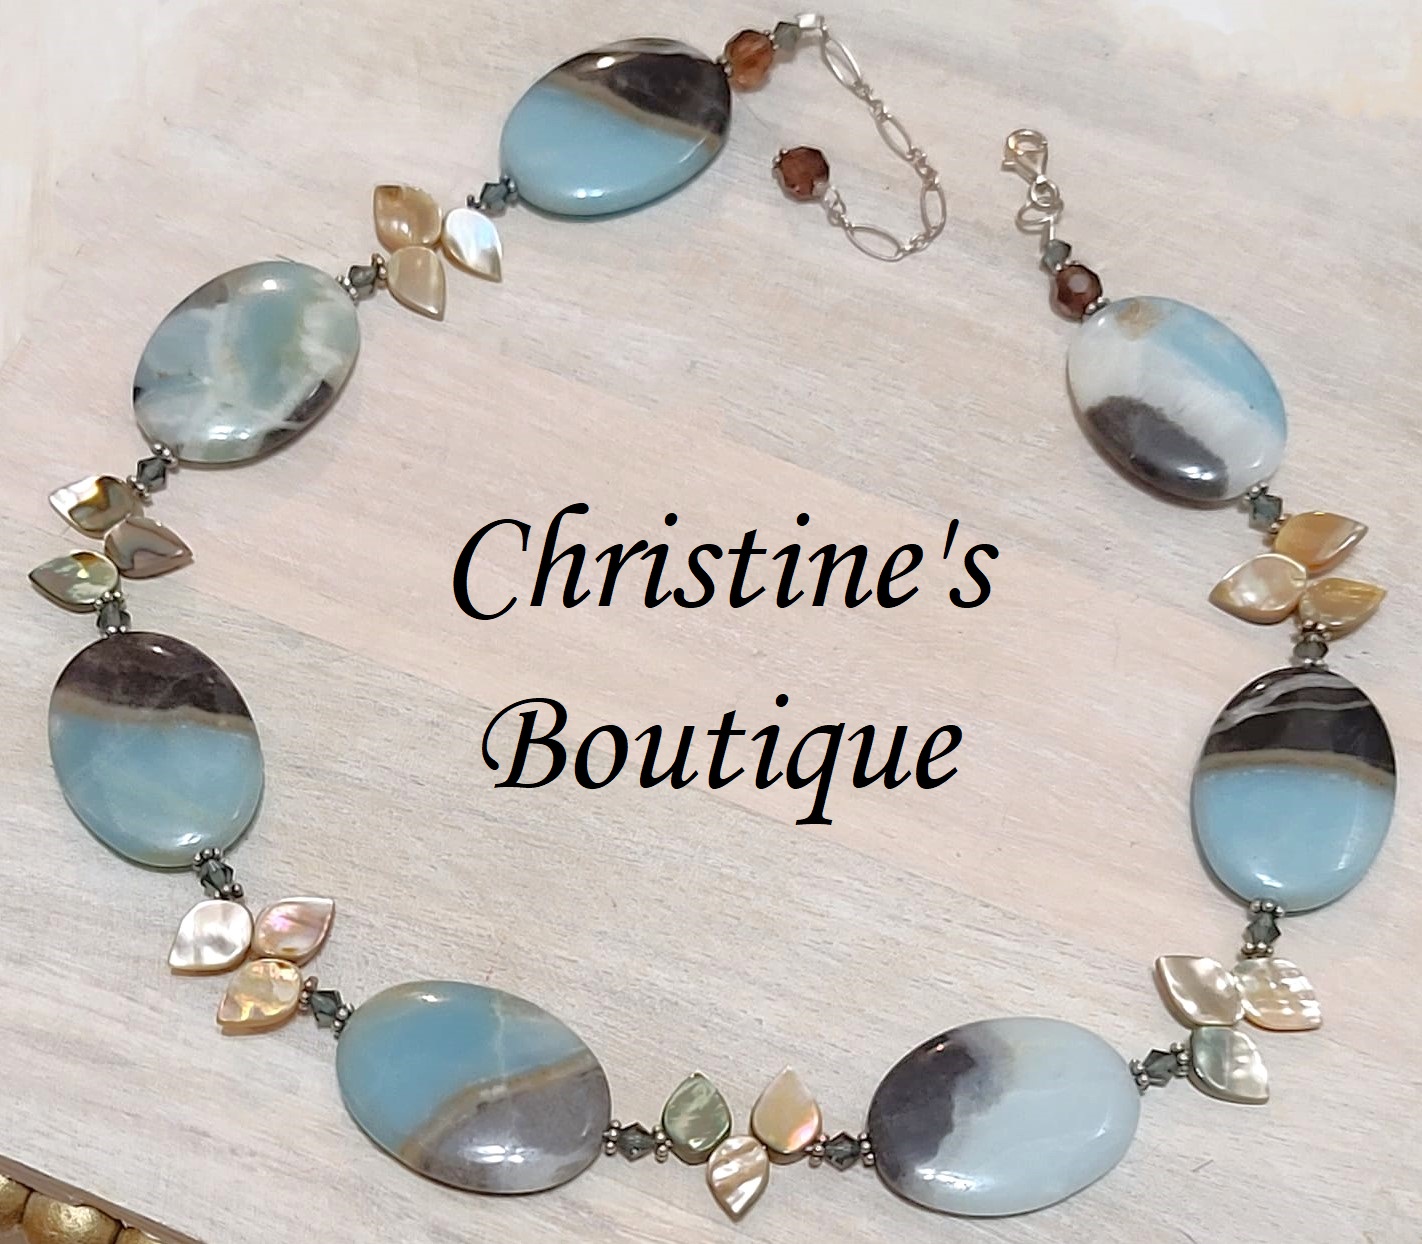 Gemstone necklace, amazonite, abalone shell, austrian crystals accents with sterling silver clasp/extender